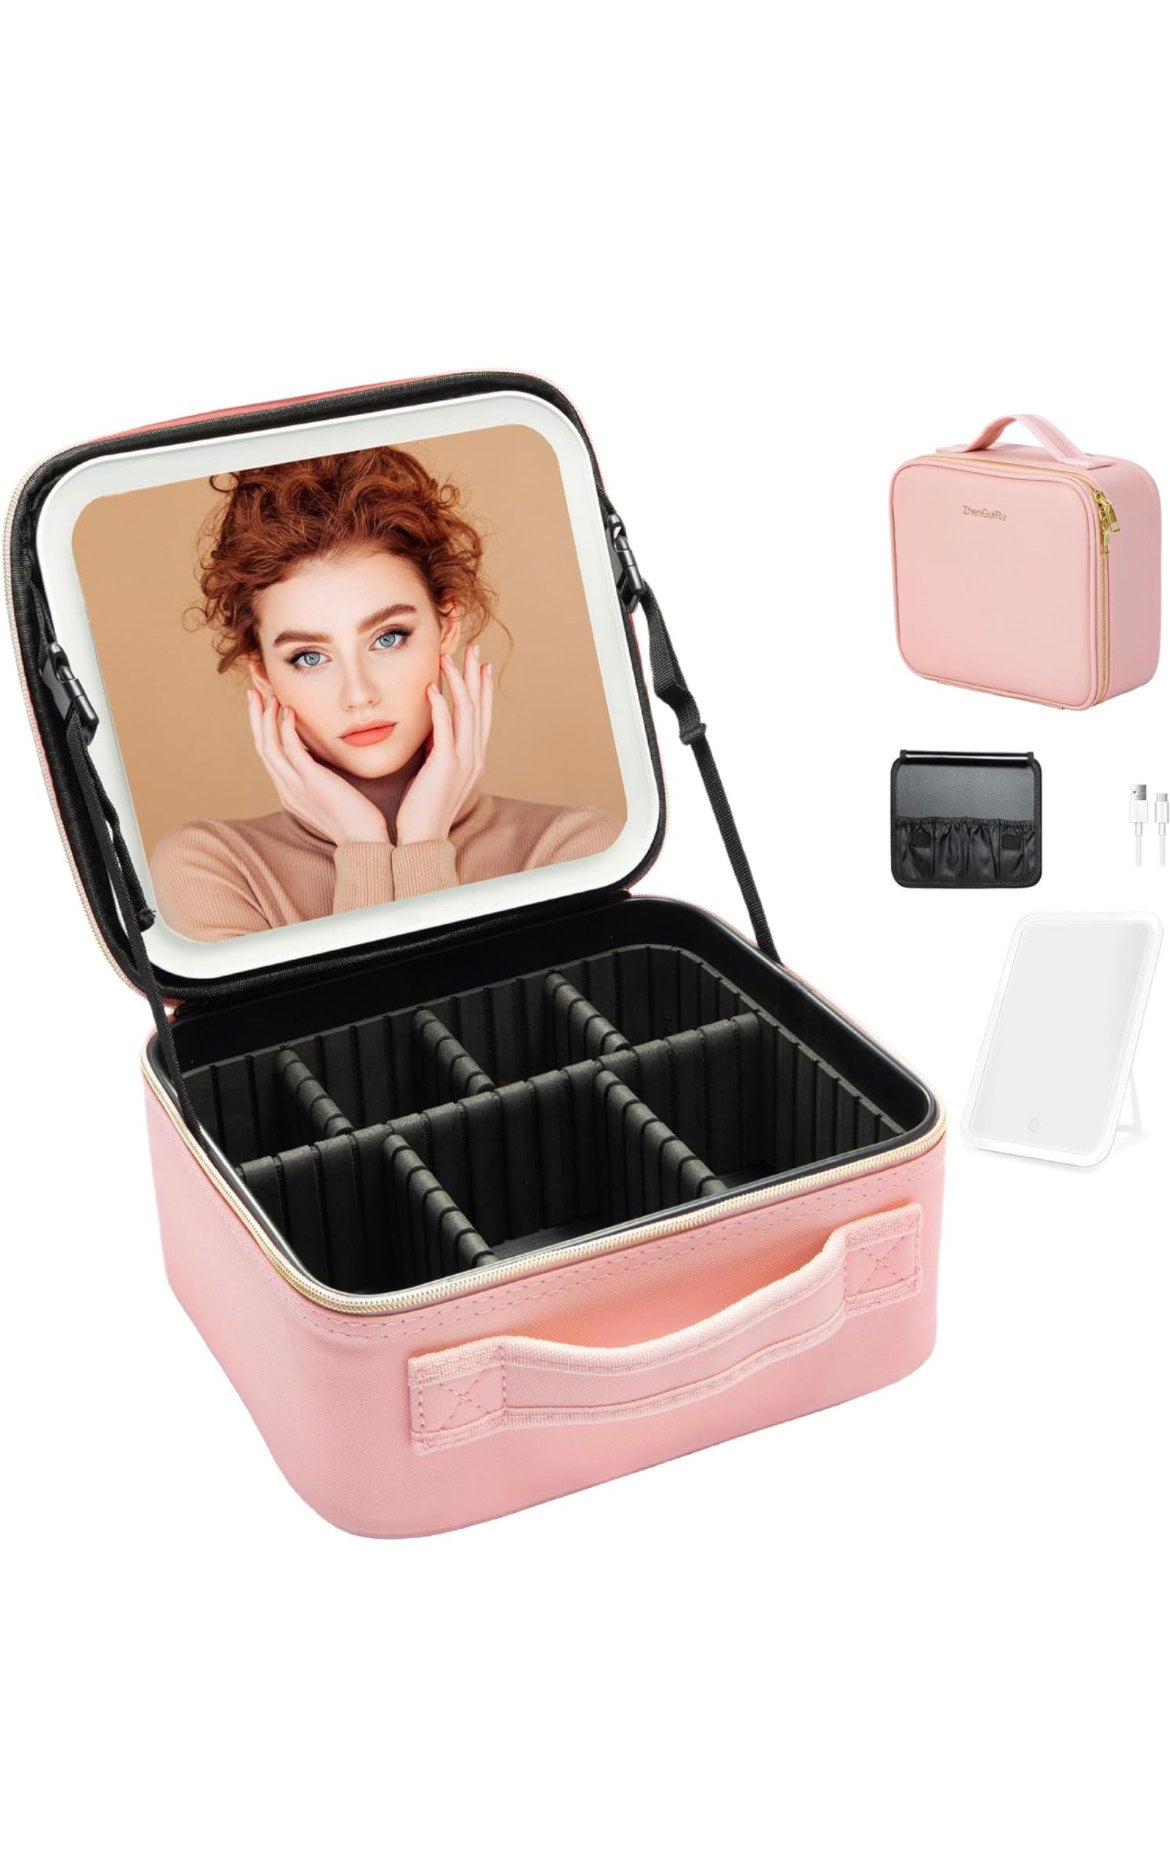 Jey's Iconic Makeup Case